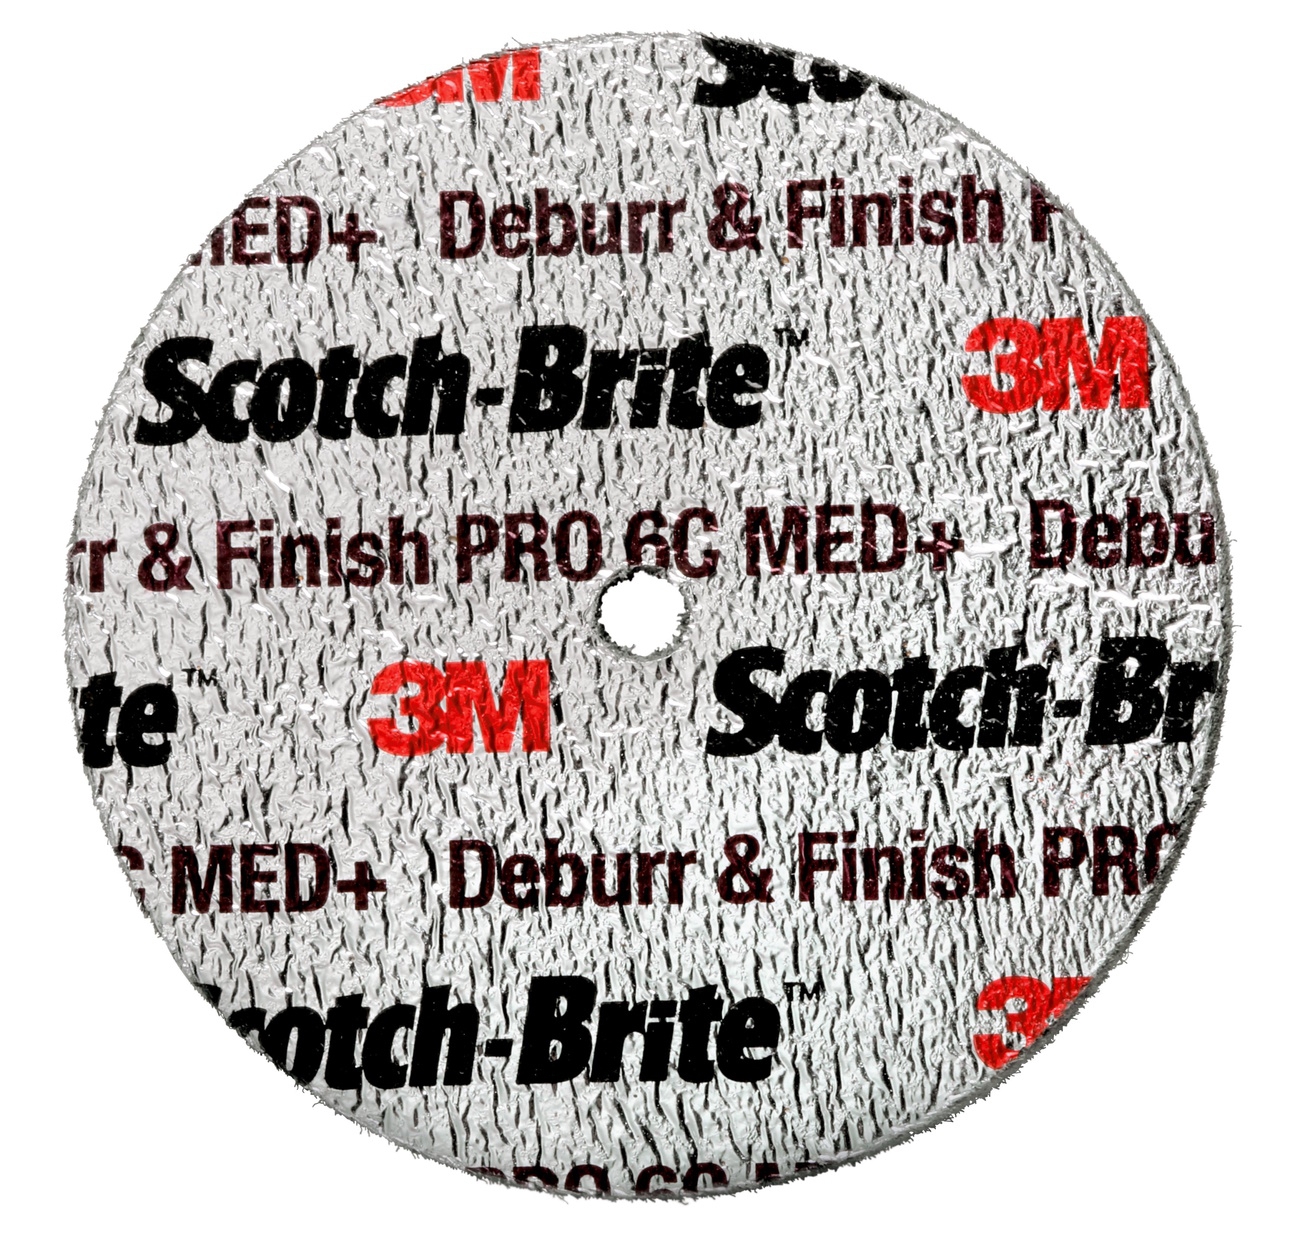 3M Scotch-Brite Deburr and Finish PRO compact disc DP-UW, 25 mm x 25 mm x 6,35 mm, 4C MED+